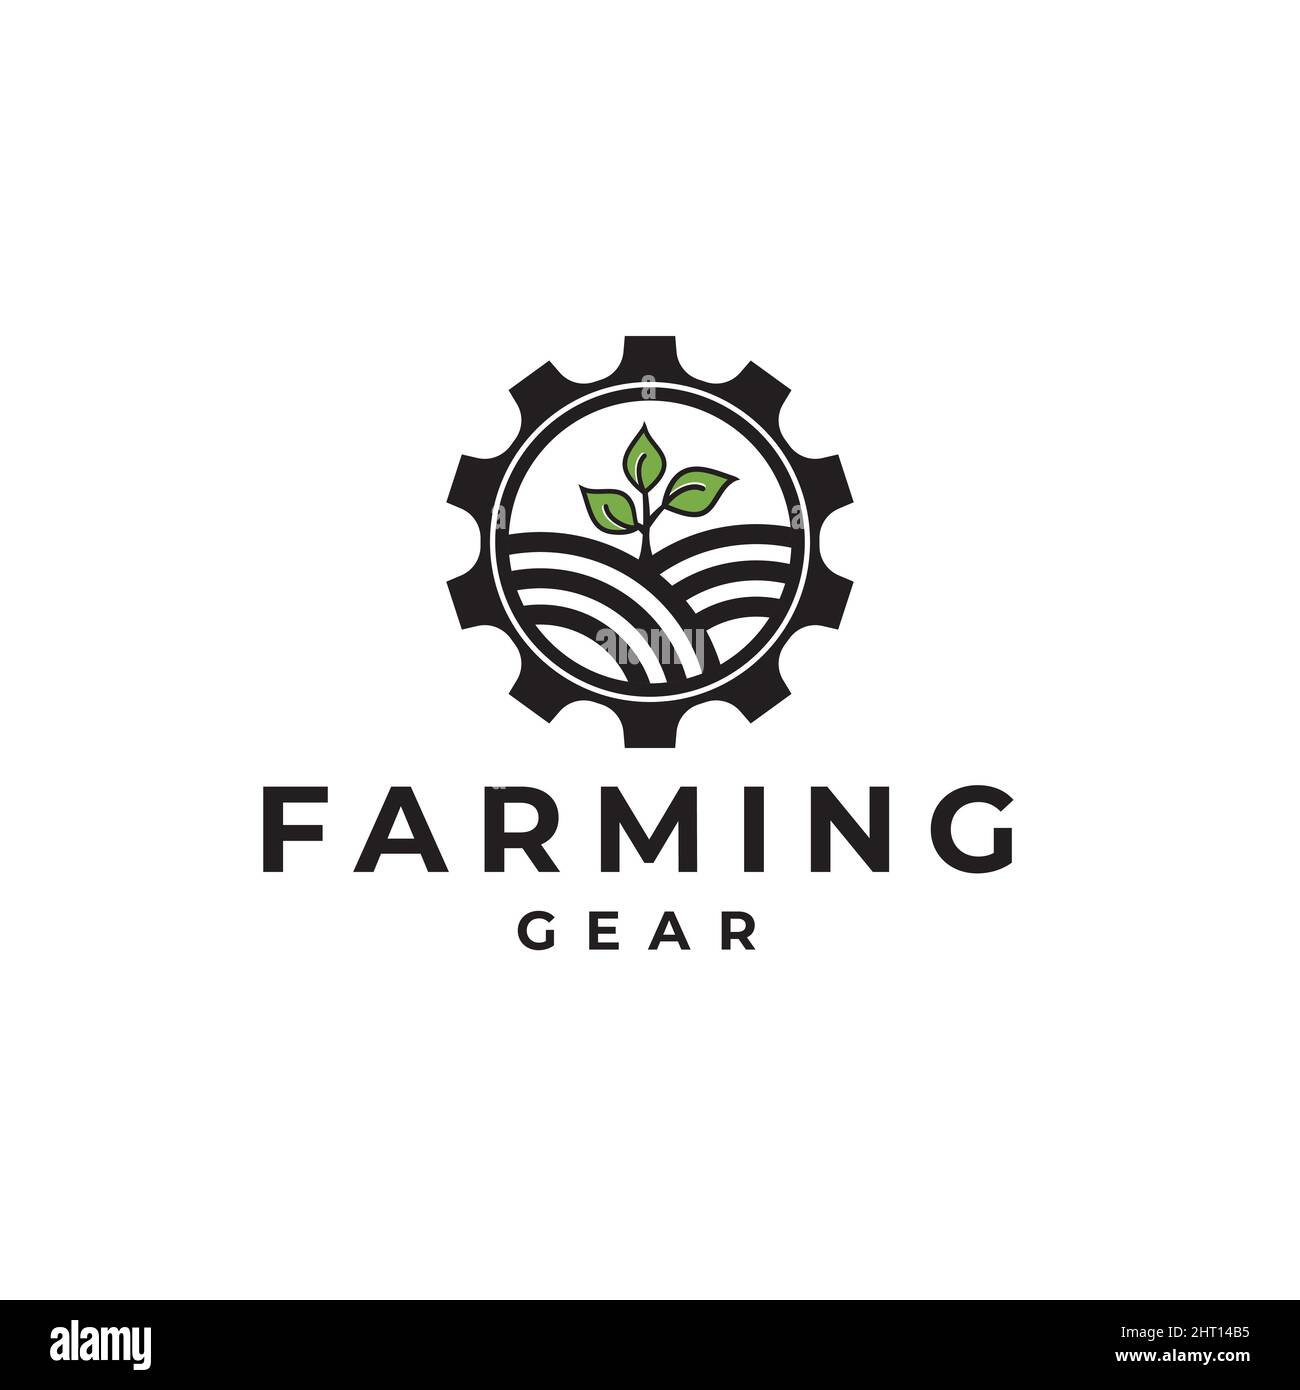 Gear illustration farm design logo, used for agricultural companies, design template Stock Vector